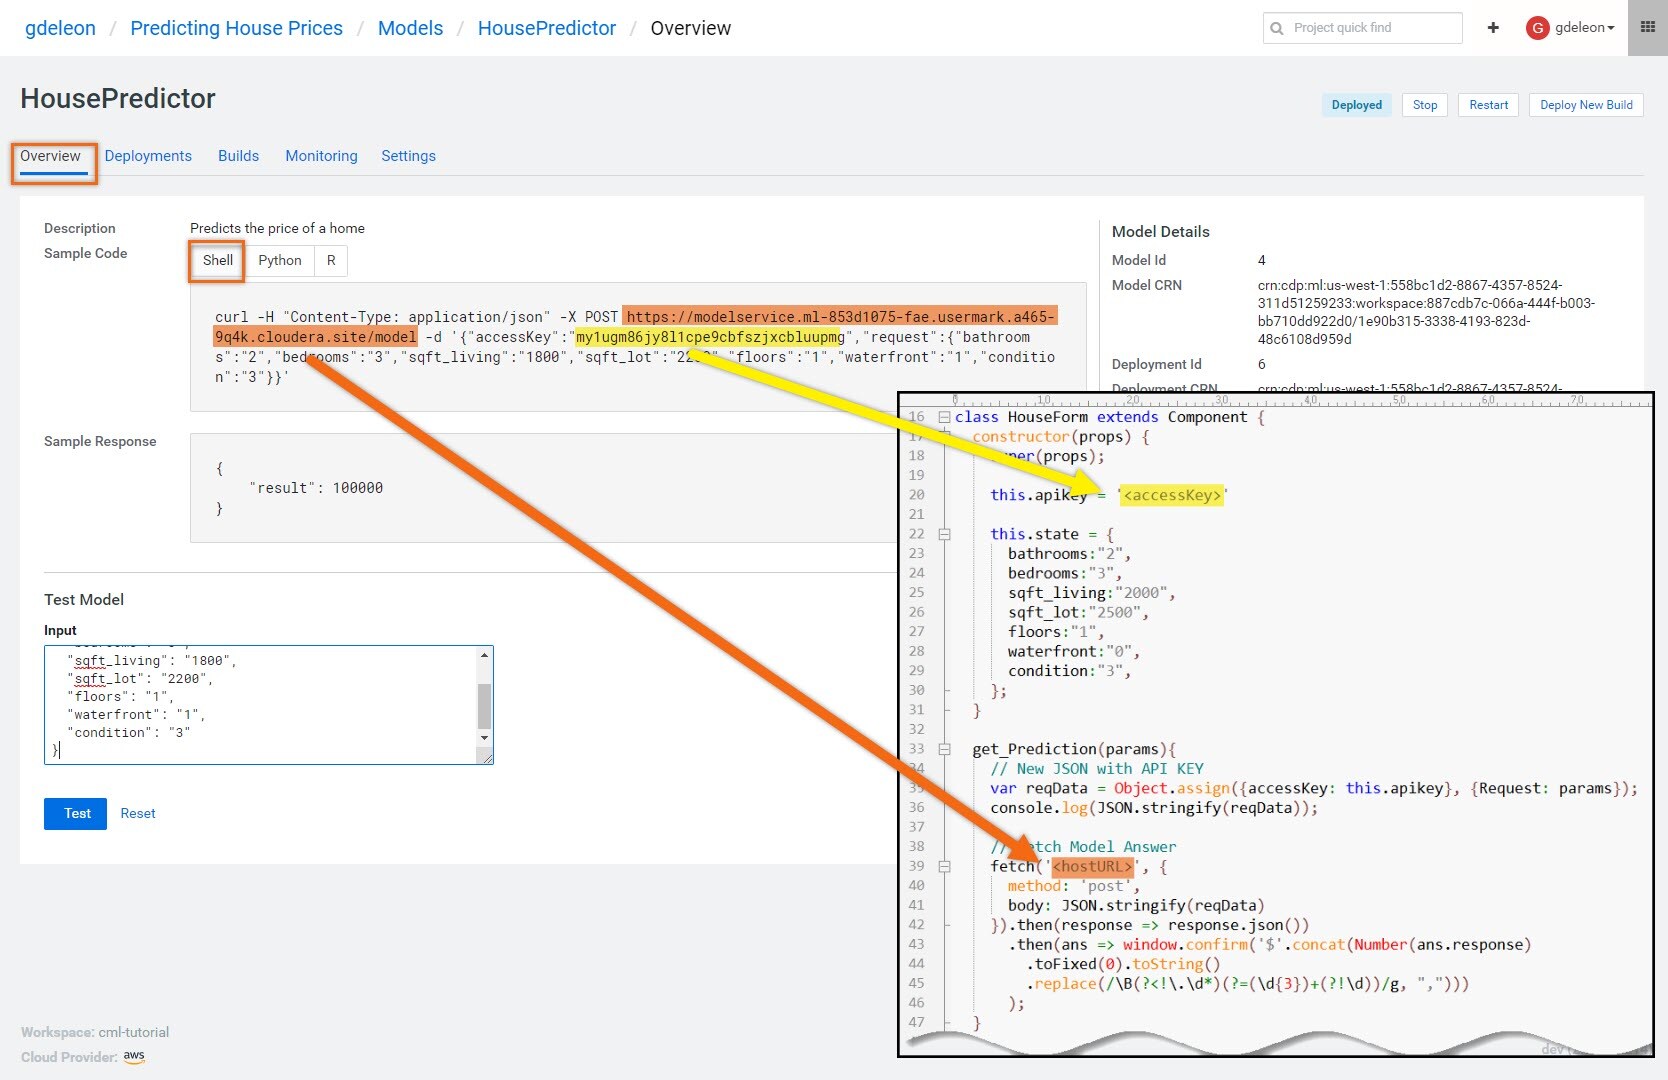 Build, Deploy and Access a Model in Cloudera Machine Learning